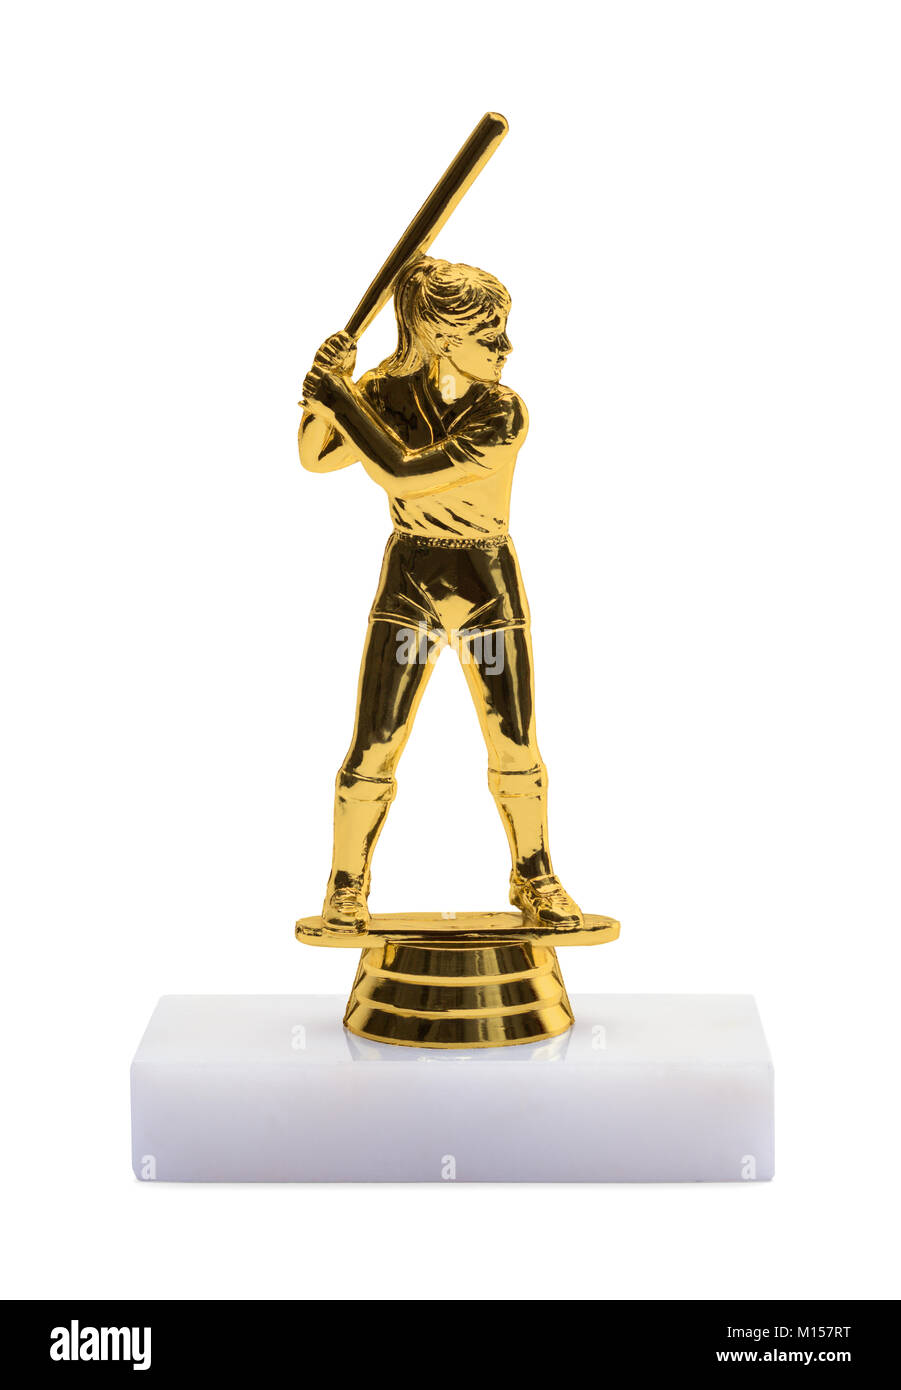 Girls Softball Trophy Isolated on a White Background. Stock Photo